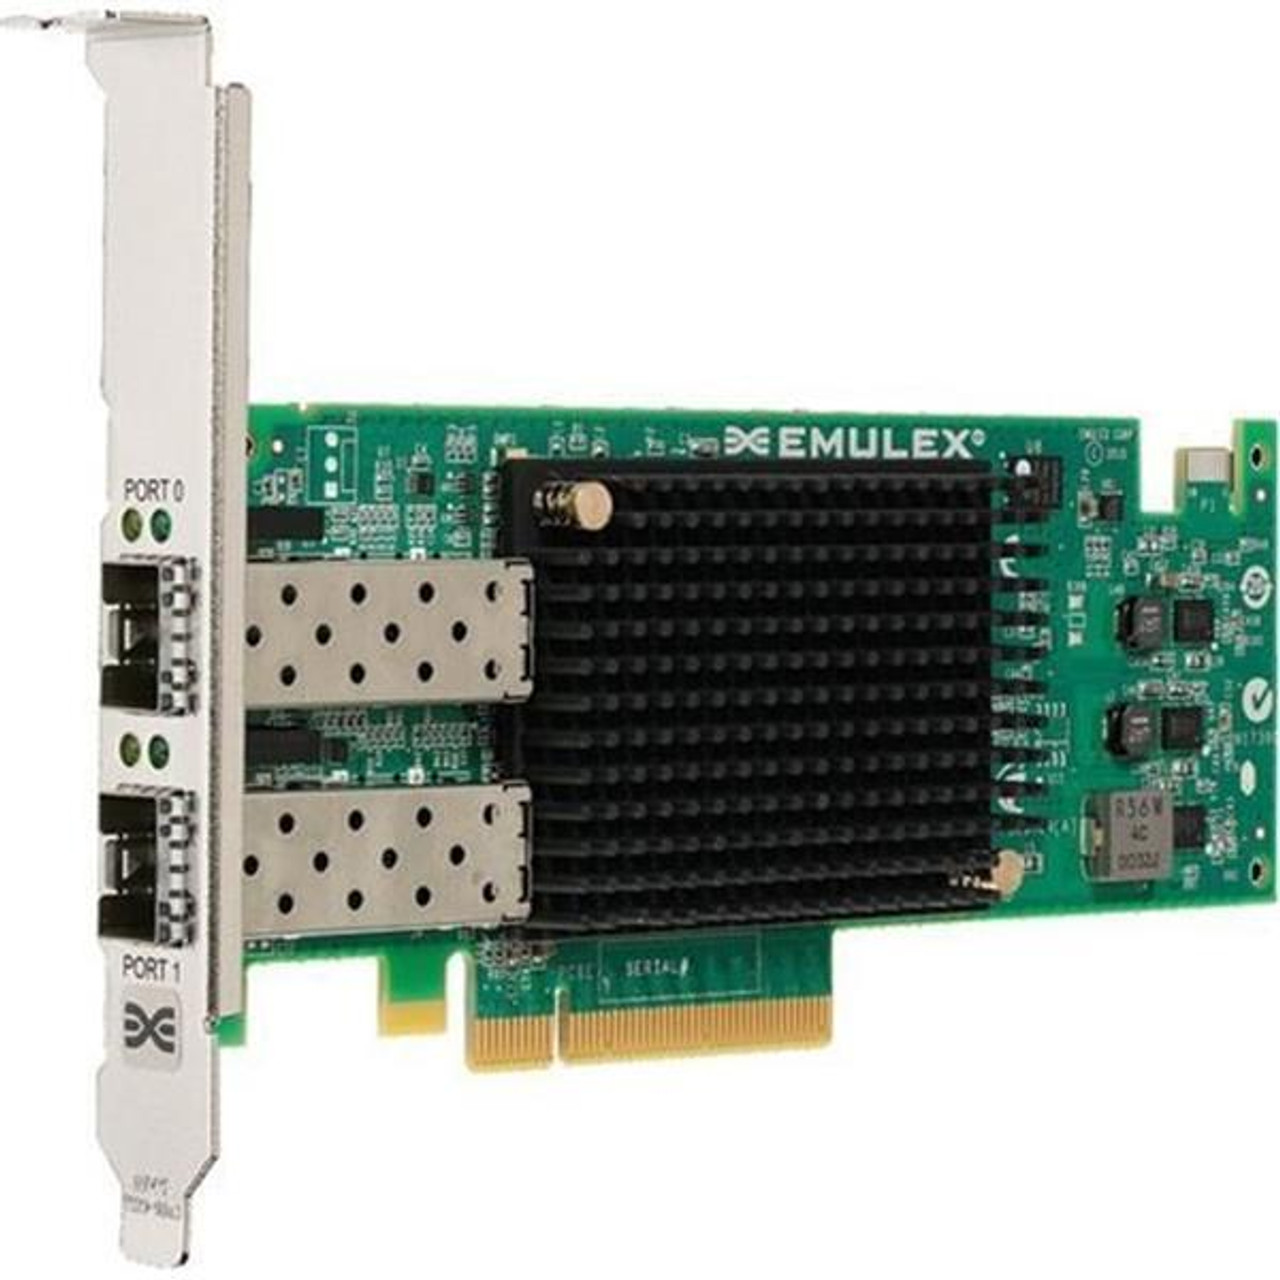 OCE11102-FX Emulex Network OneConnect 2-Port 10Gbps PCI Express 2.0 Low-profile Converged Network Adapter